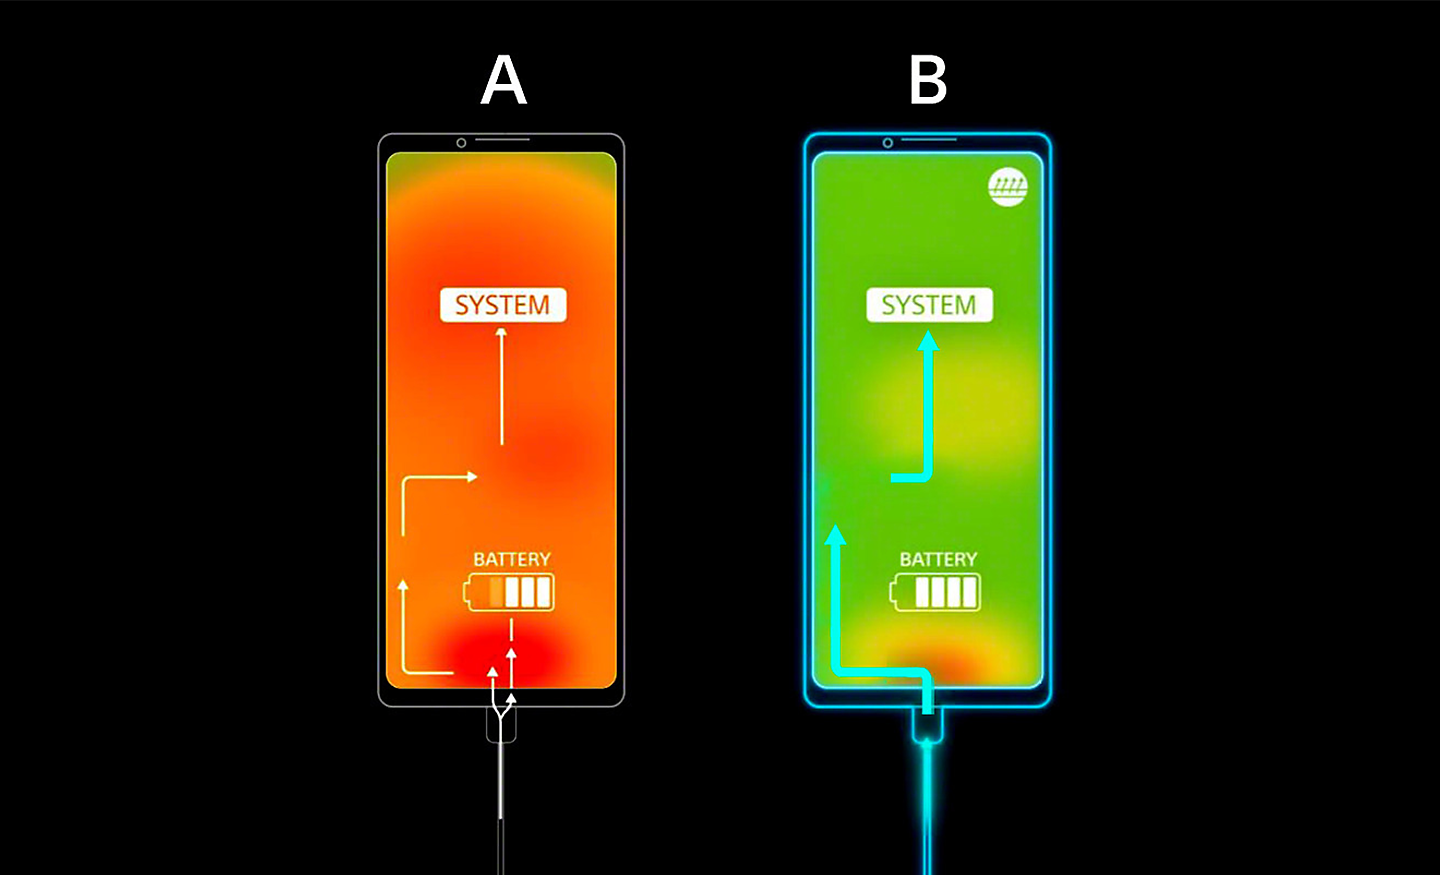 Diagram showing phone A, which is overheating and has an orange screen, and phone B, which has a green screen